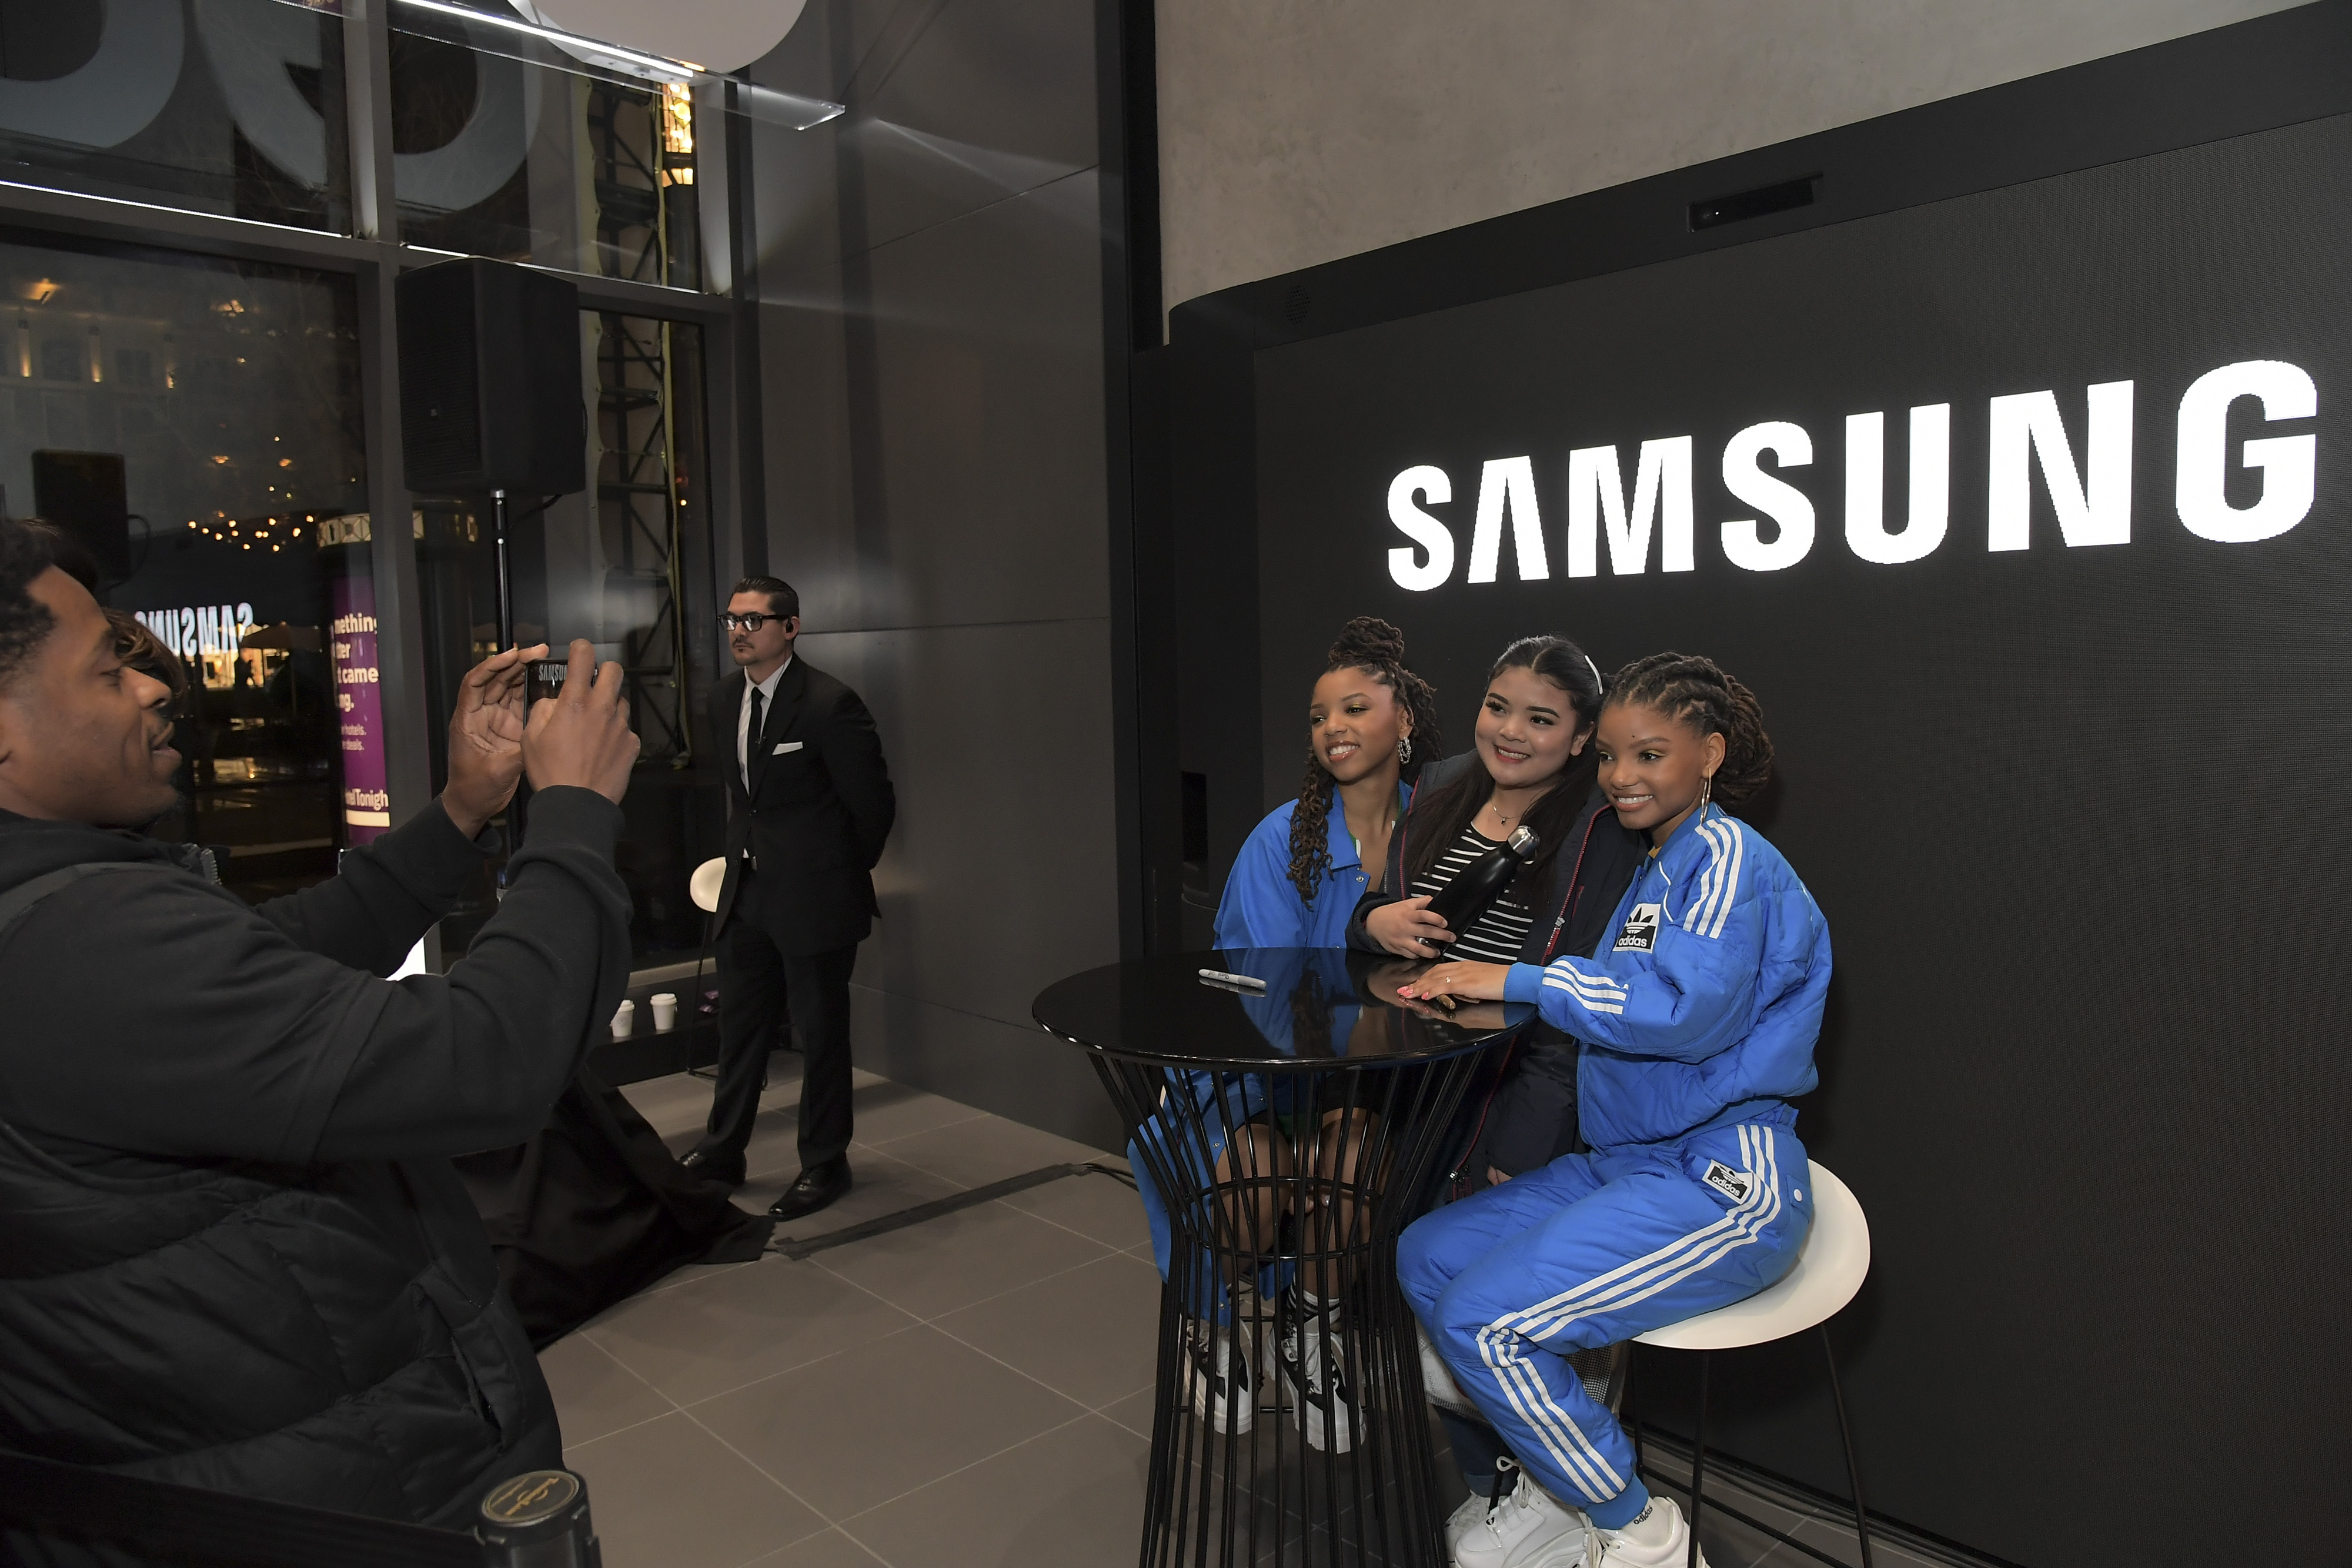 Samsung Meet and Greet with Chloe x Halle